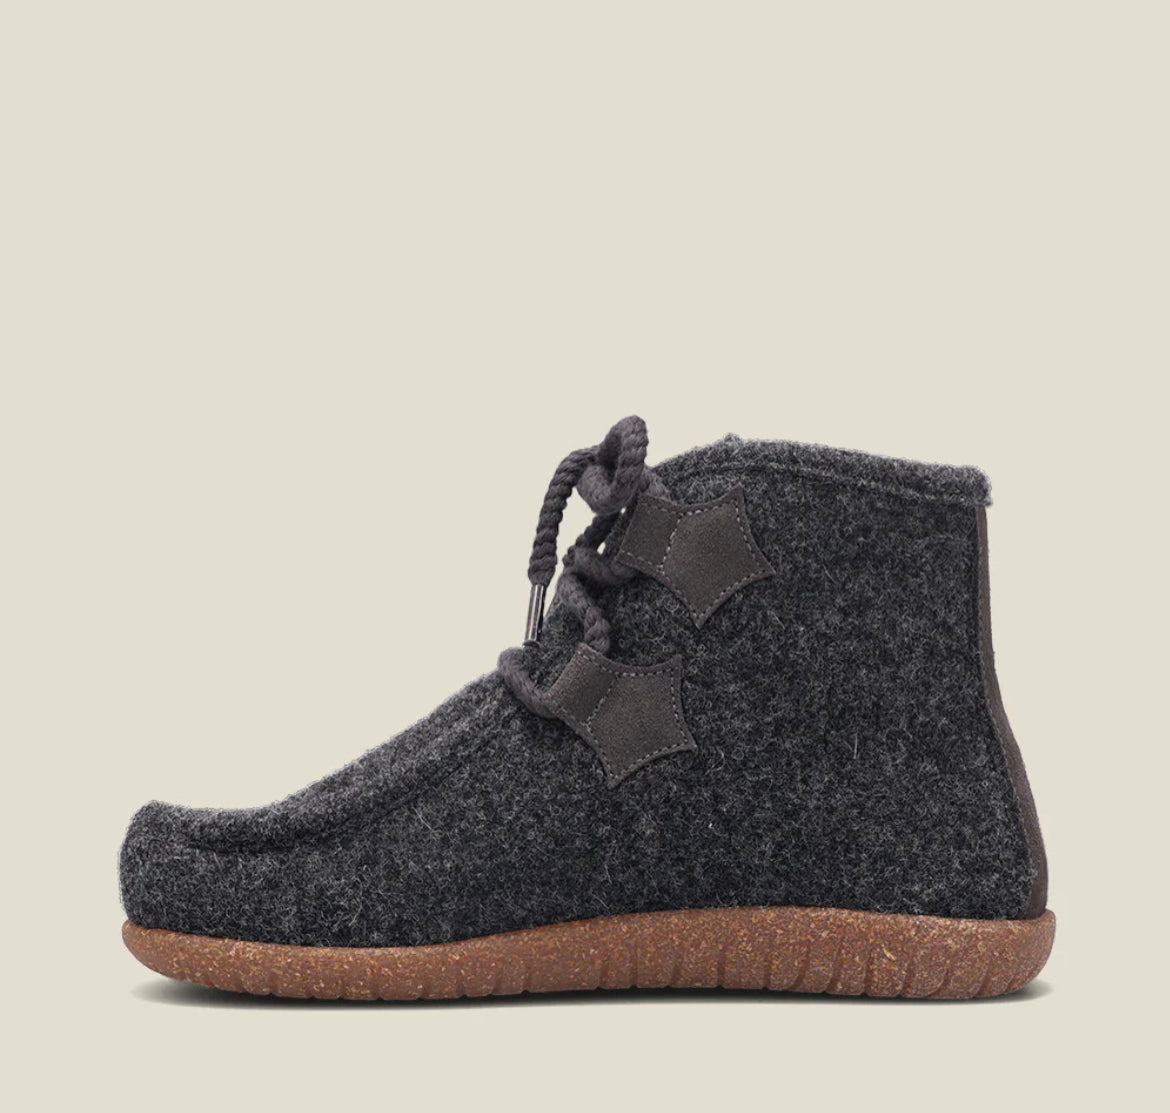 Taos Woolabee Charcoal Women’s Boot - All Mixed Up 